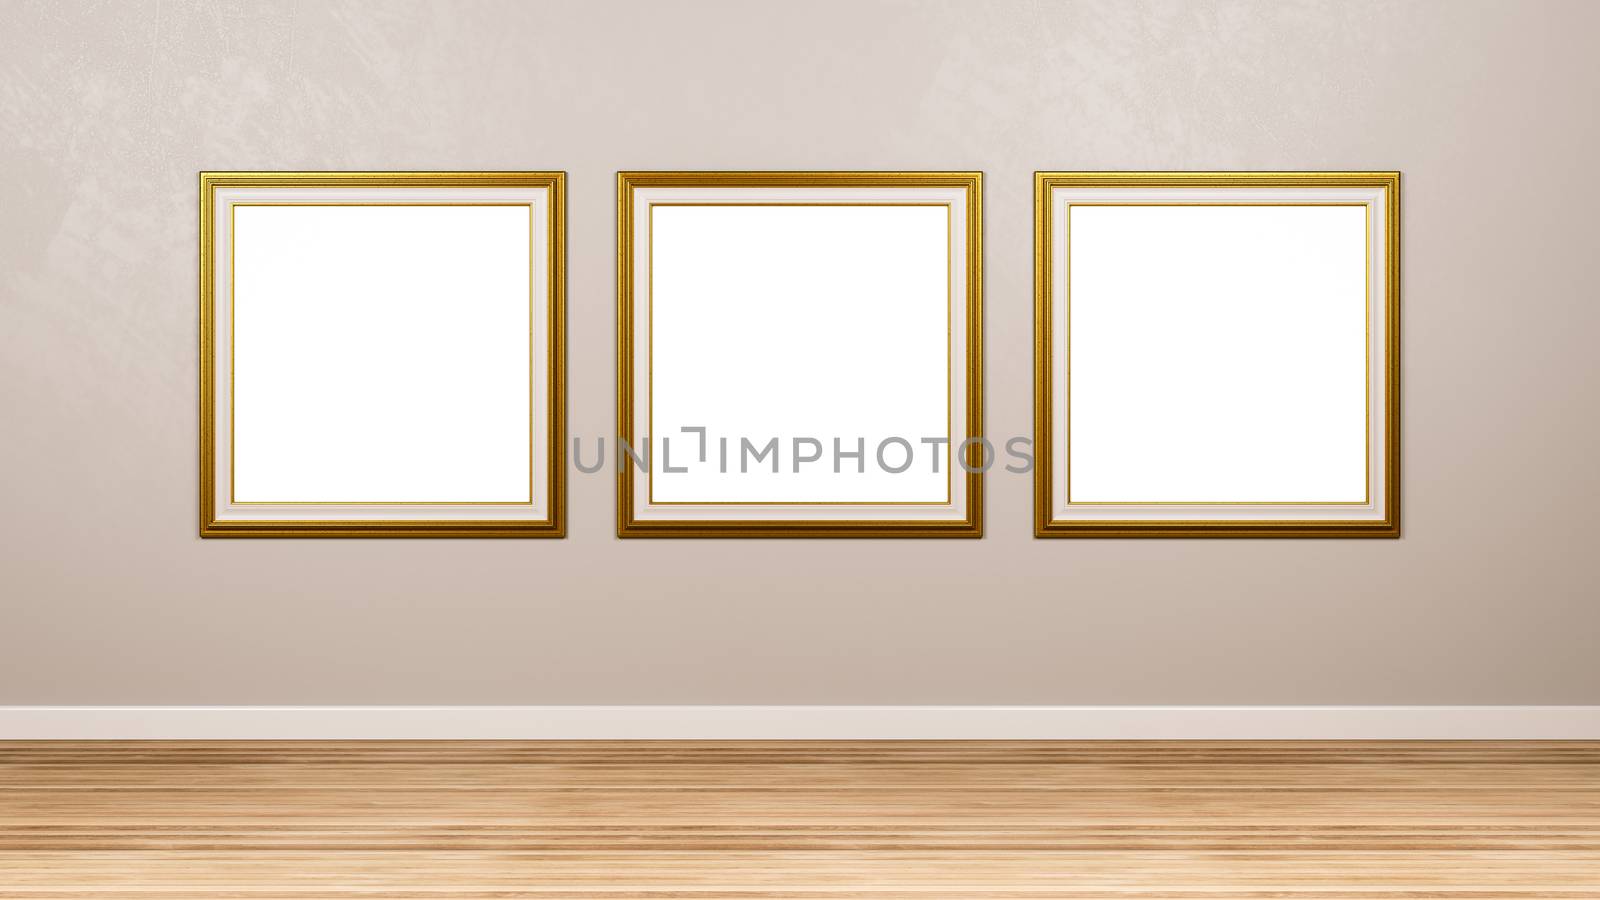 Triptych of Classic Square Empty Golden Picture Frame at the Wall in the Room 3D Render